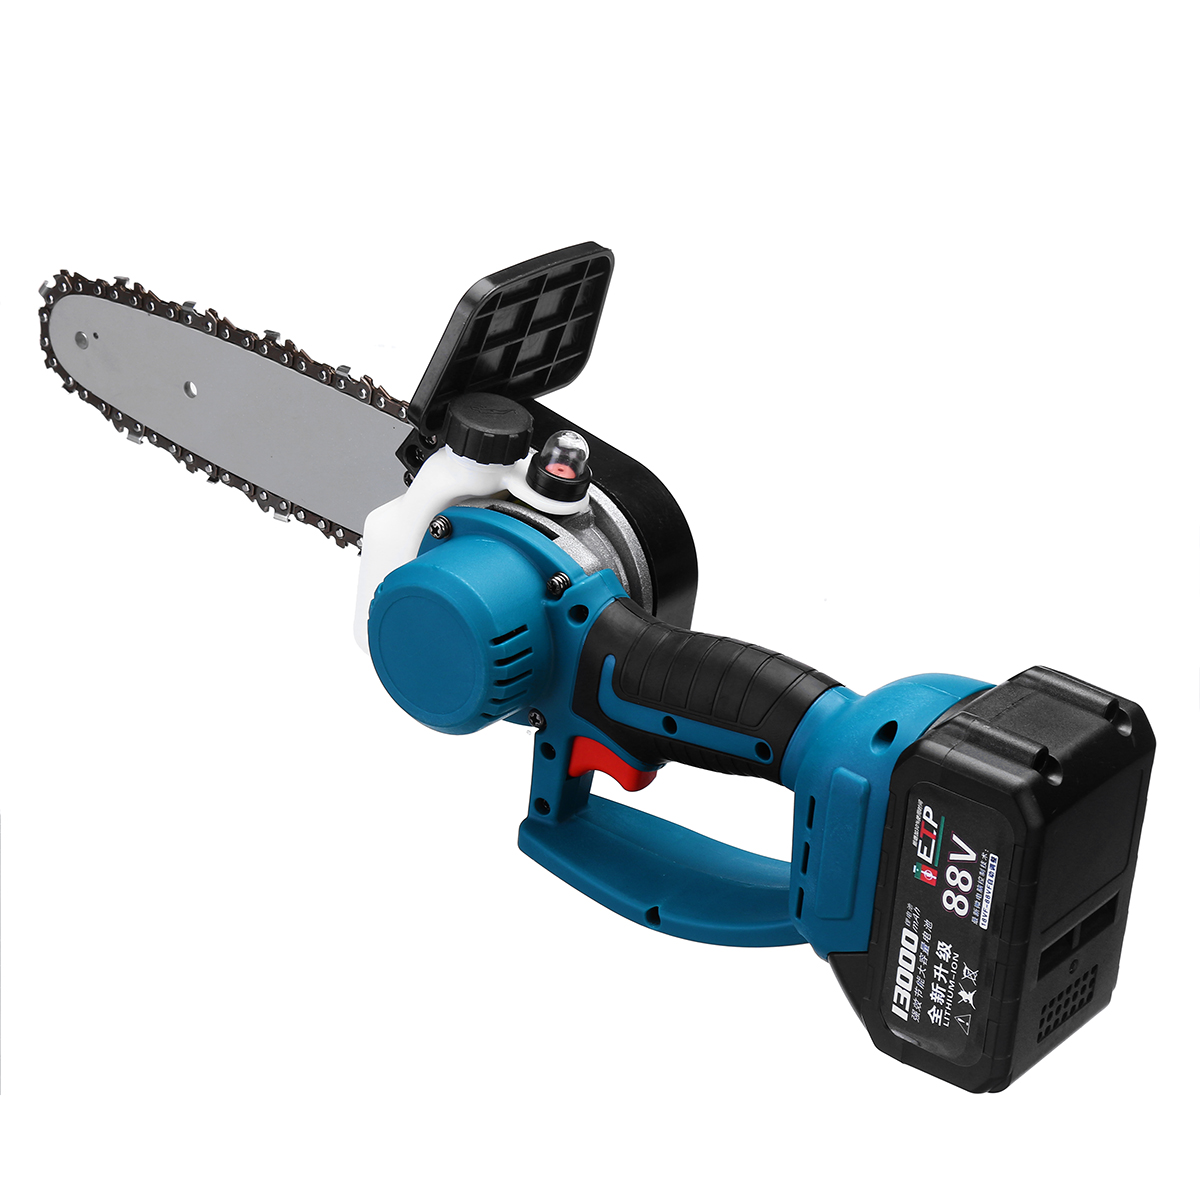 88V-1200W-8-Inch-Electric-Cordless-Chain-Saw-Woodworking-Saw-Wood-Cutter-with-Battery-1790807-7